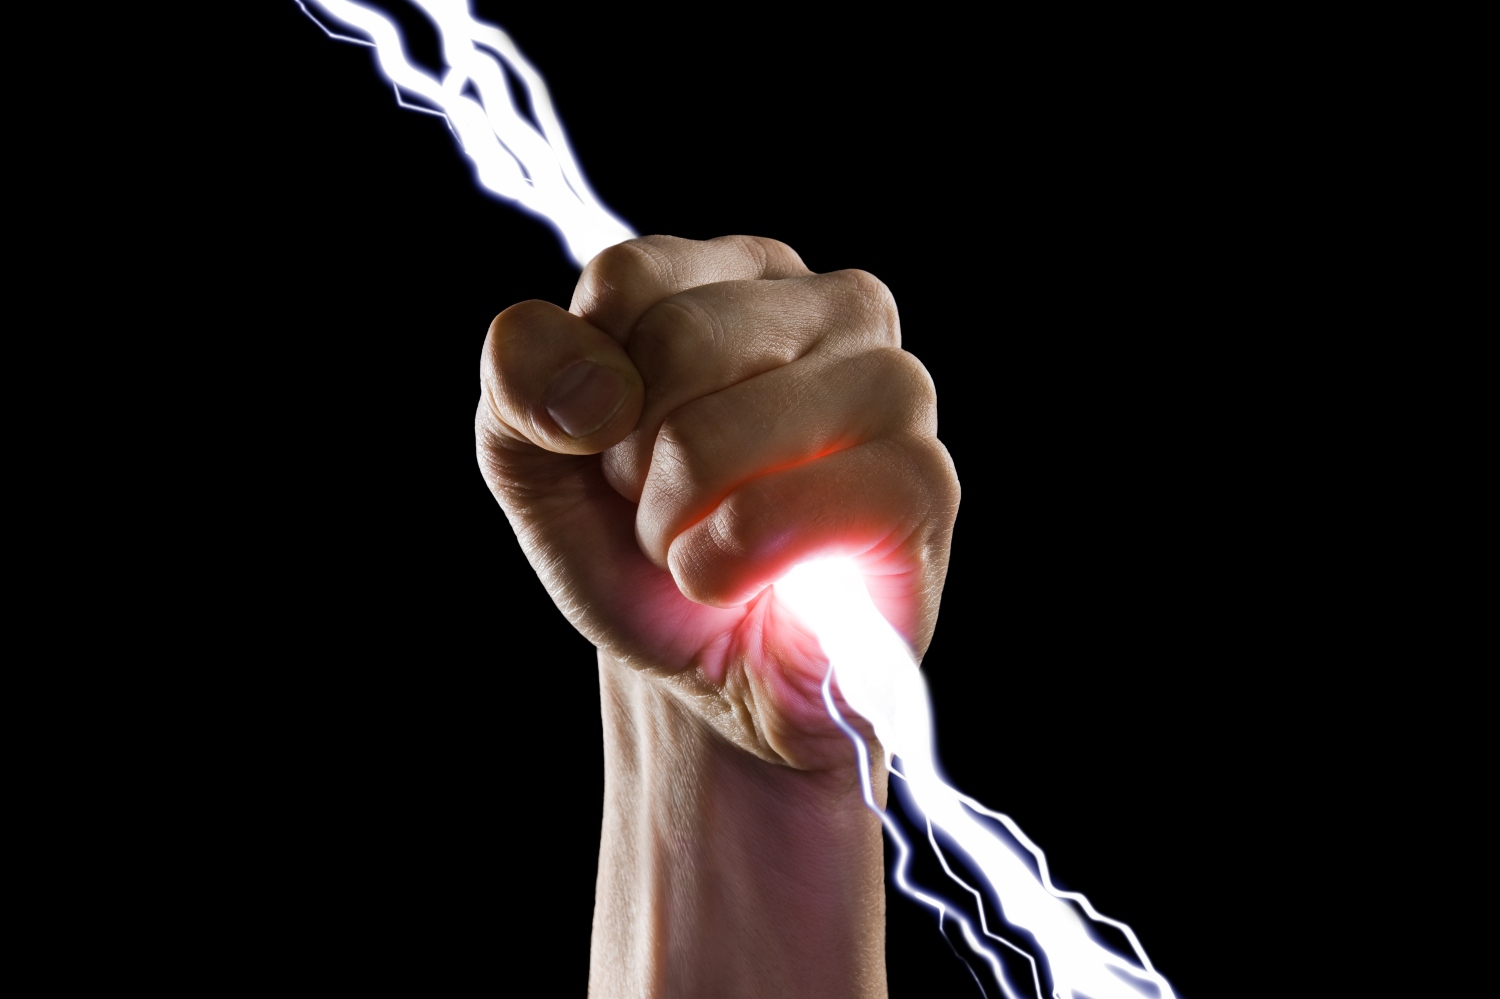 Close up image of man's fist holding a bolt of lightning